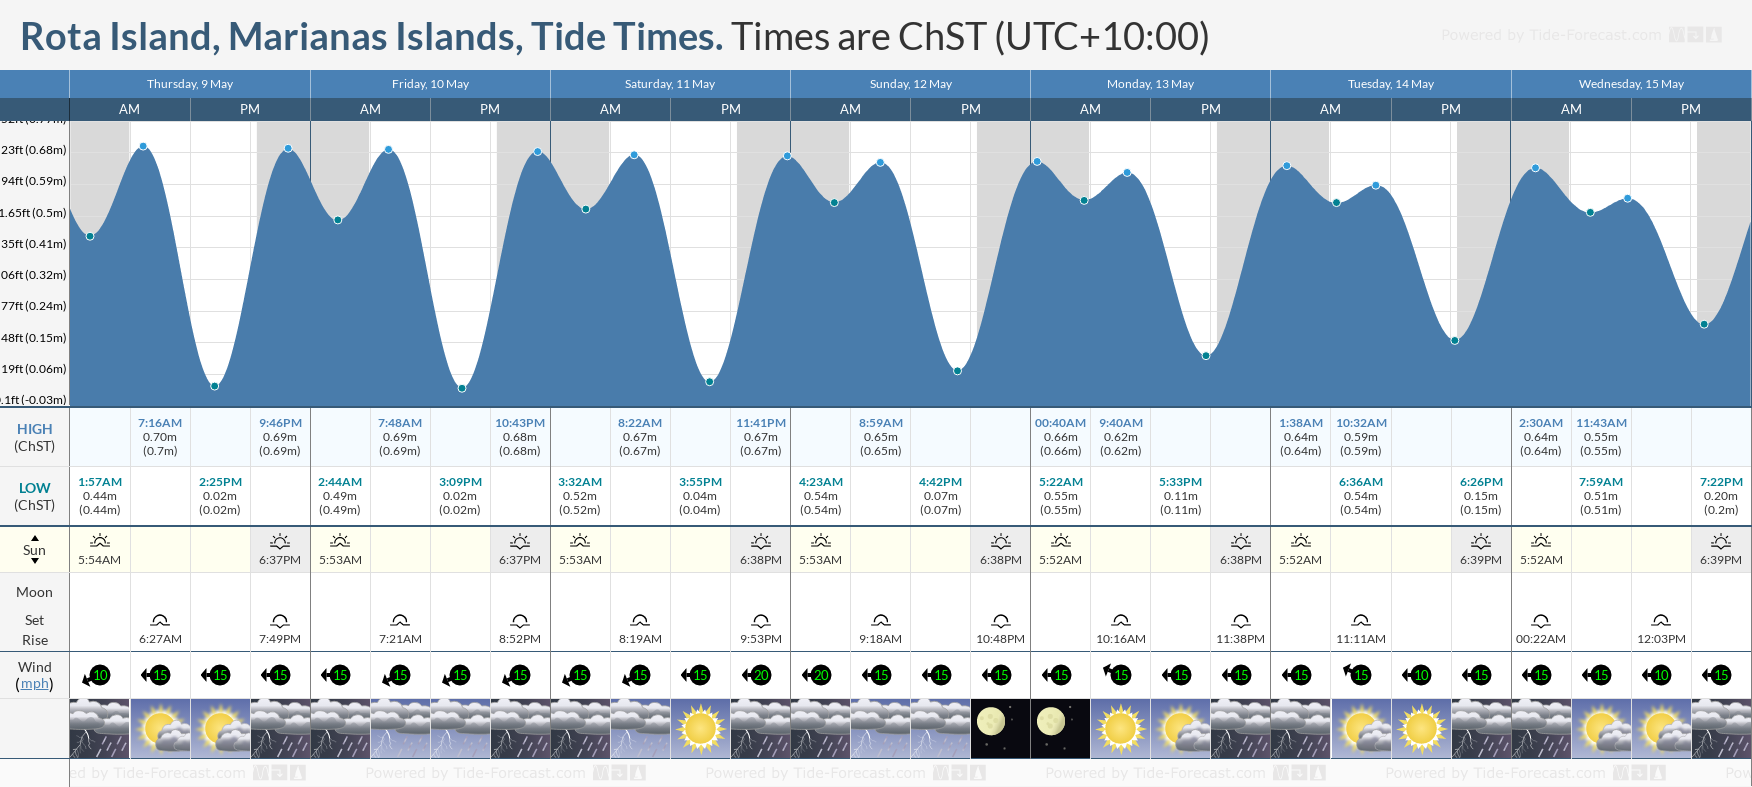 Rota Island, Marianas Islands Tide Chart including high and low tide tide times for the next 7 days